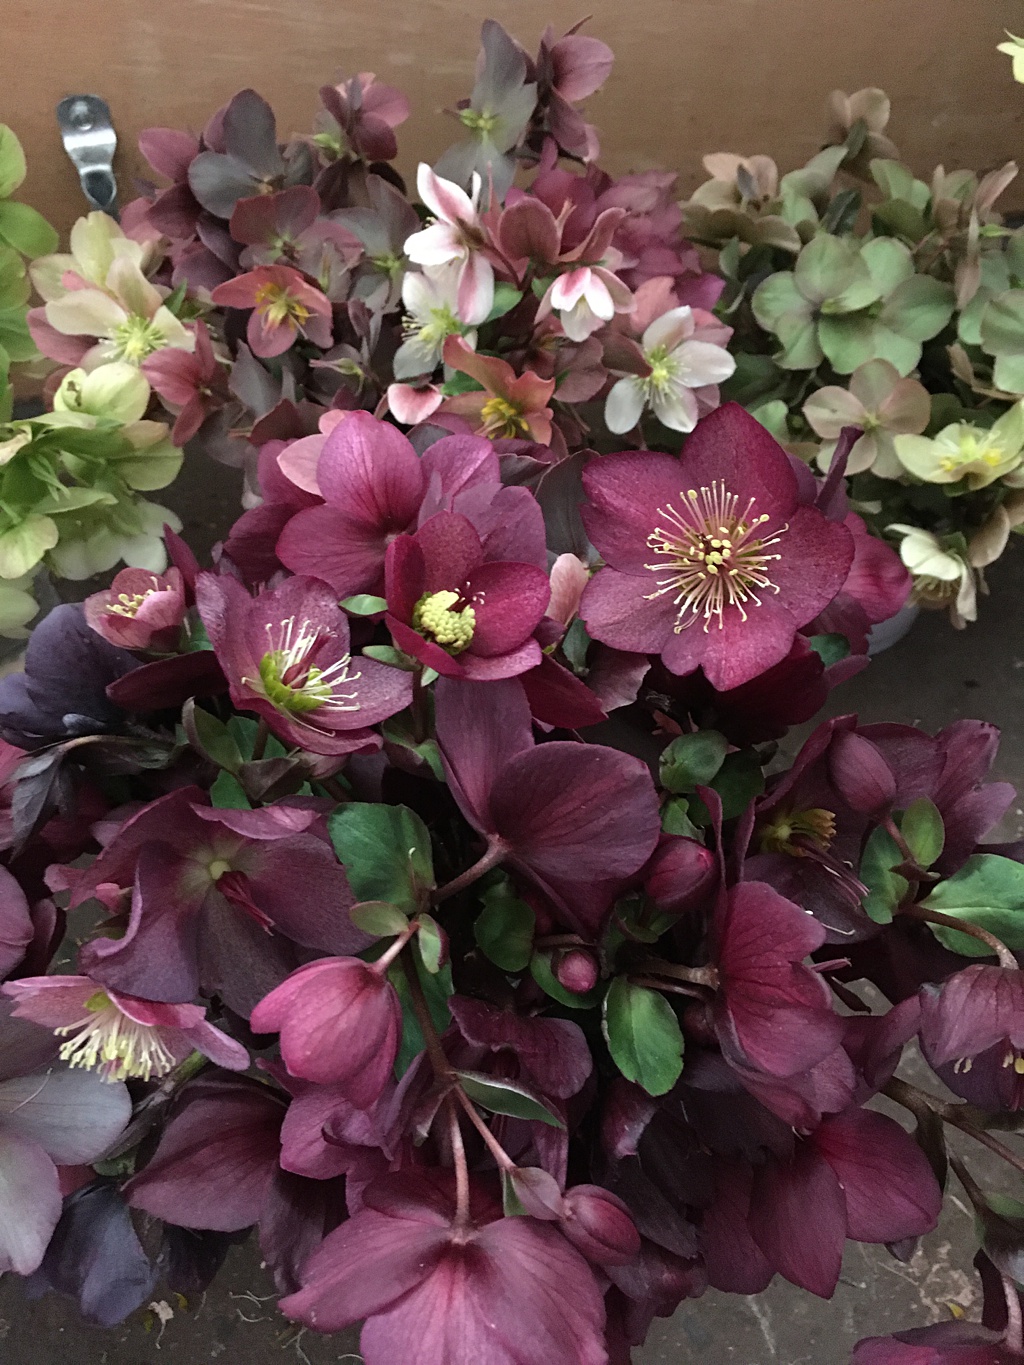 Buckets of hellebores in the studio prior to creating the flower dress